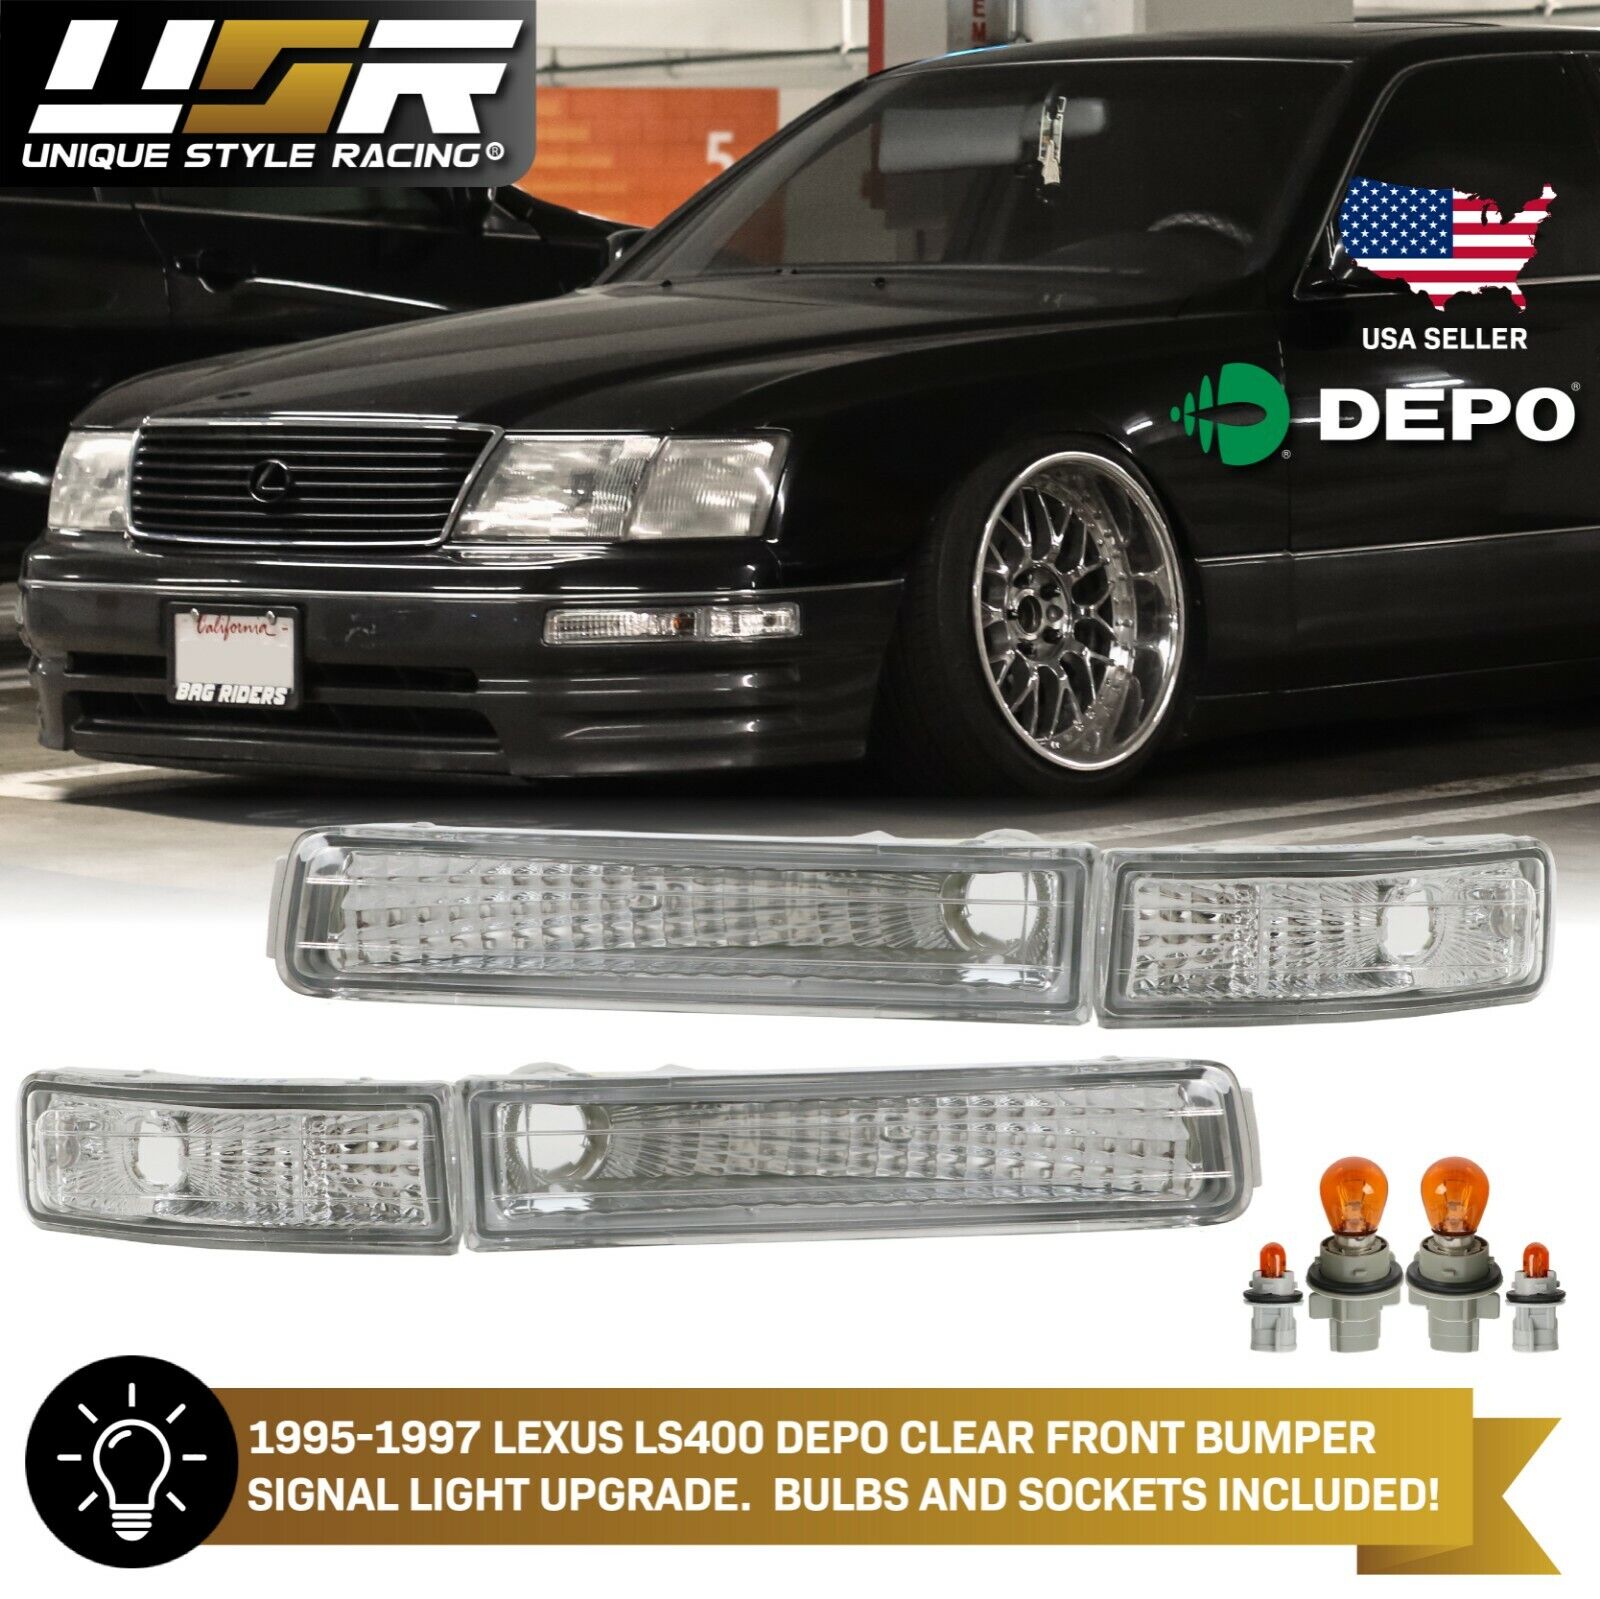 DEPO Crystal Clear Front Bumper Signal Lights For 1995-1997 Lexus LS400 LS 400